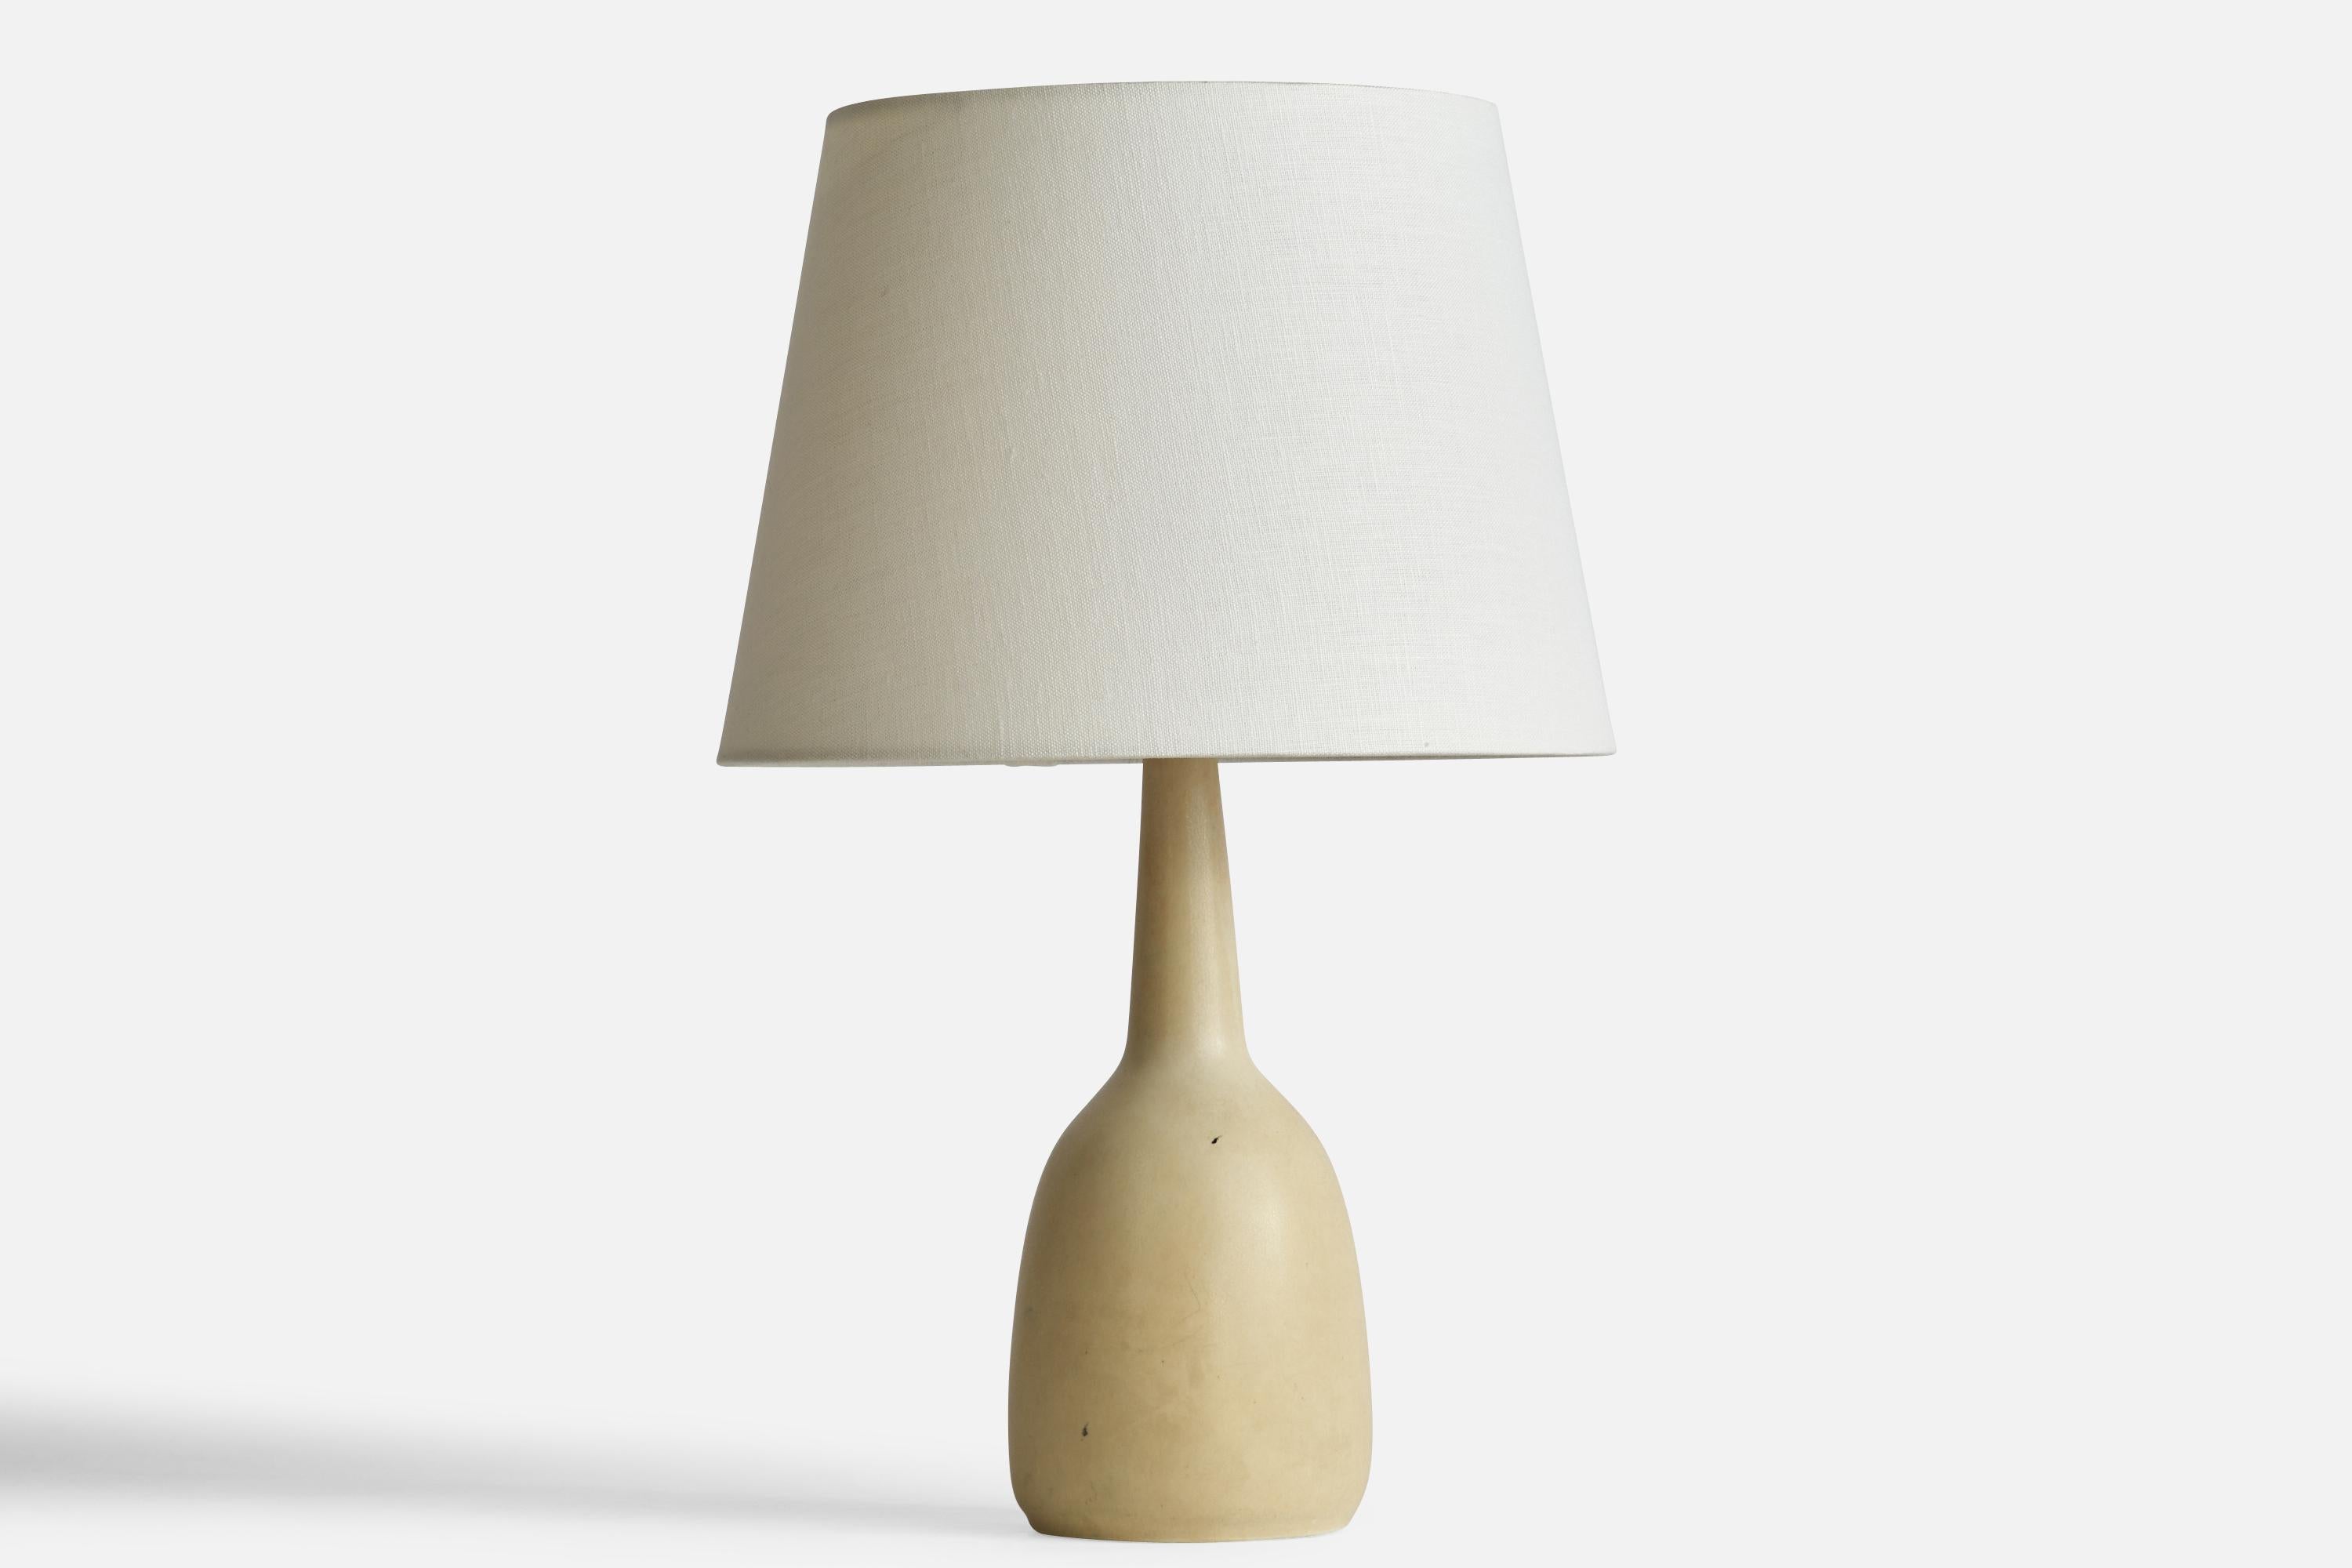 A beige-glazed stoneware table lamp designed by Per & Annelise Linneman-Schmidt and produced by Palshus, Denmark, 1960s.

Dimensions of Lamp (inches): 13.75” H x 5” Diameter
Dimensions of Shade (inches): 9” Top Diameter x 12” Bottom Diameter x 9”